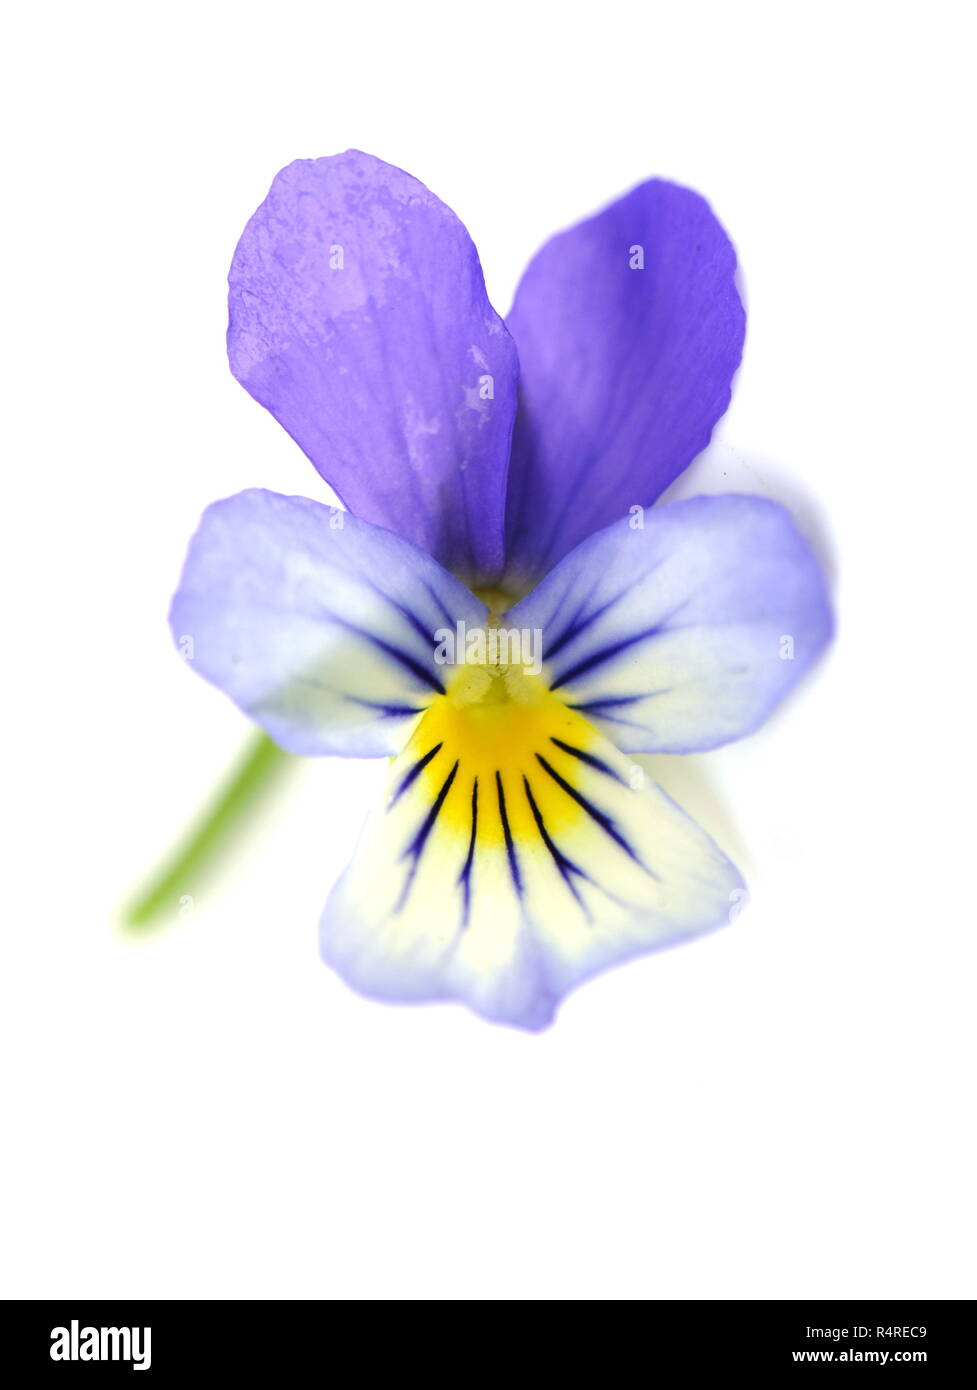 Wild pansy flower Viola tricolor isolated on white background Stock Photo